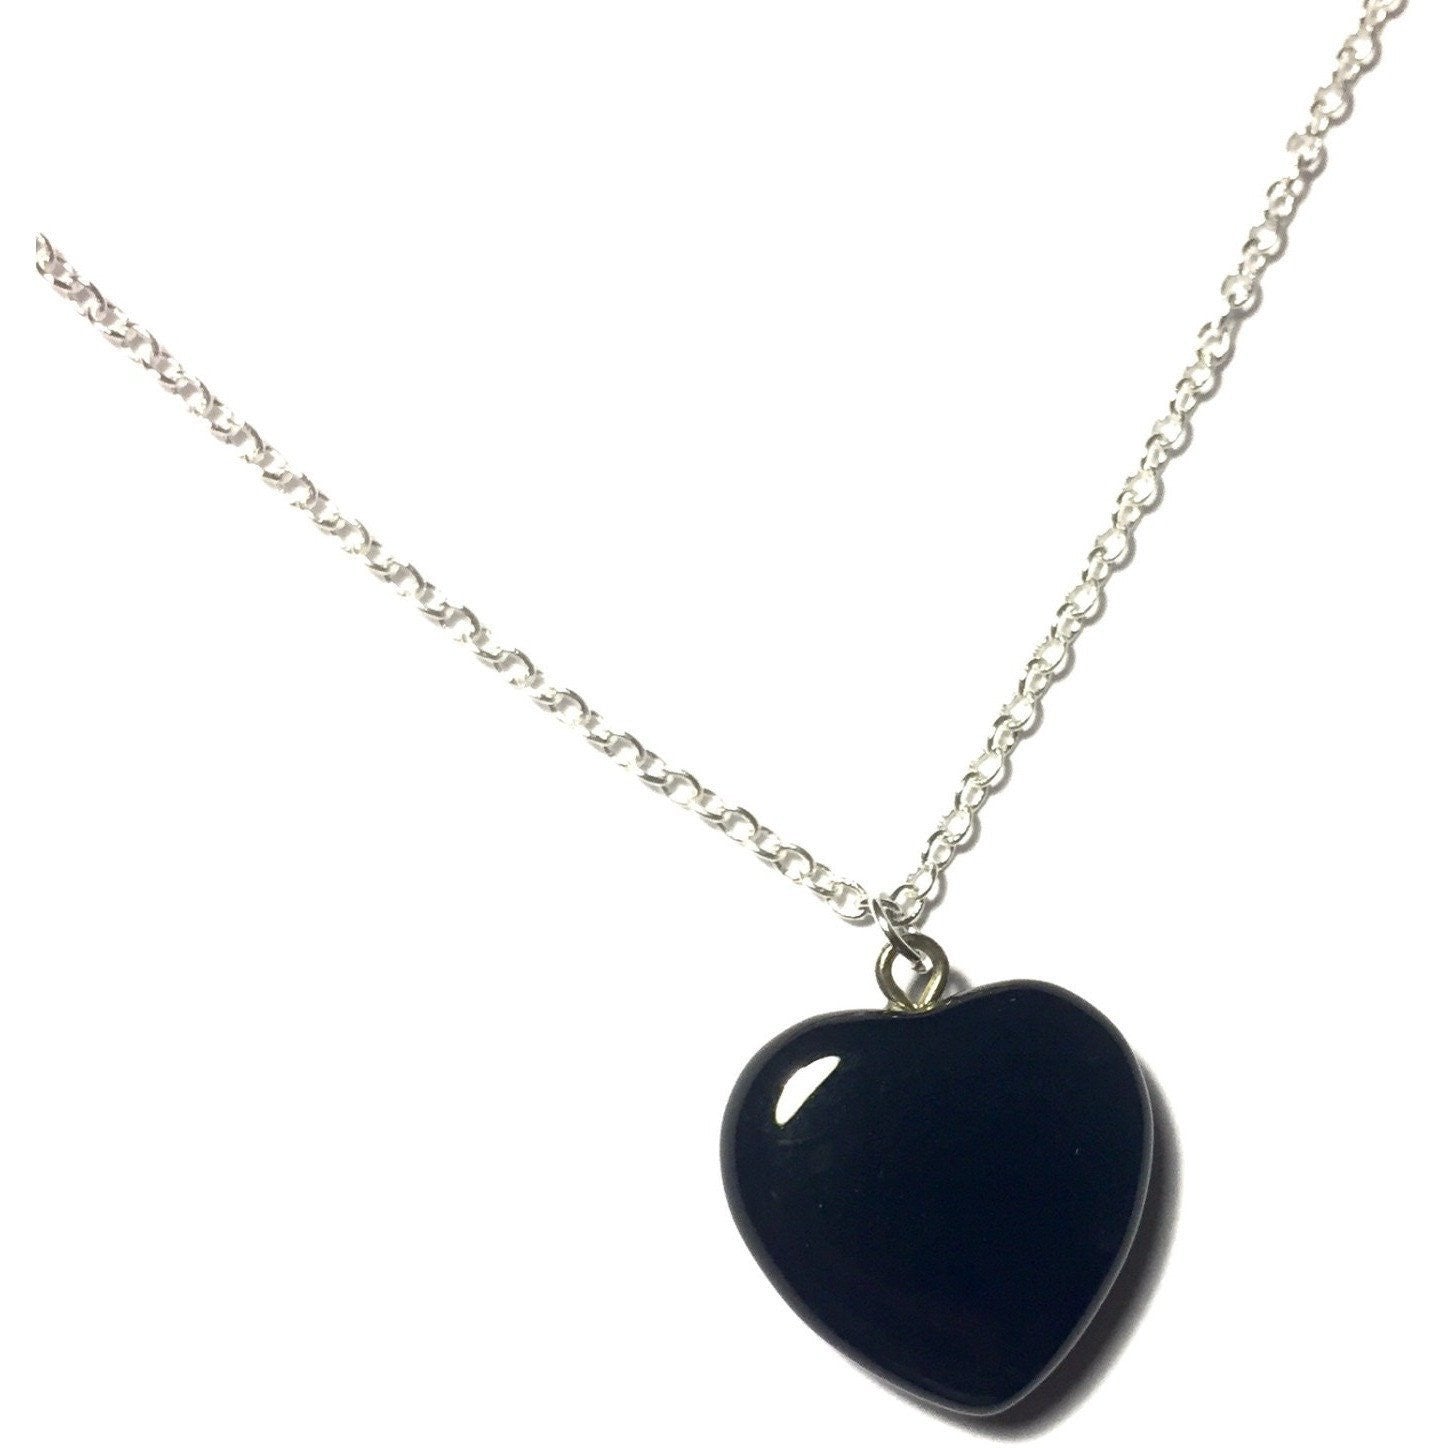 Tiny Sterling Silver Black Onyx Heart Necklace, Black Heart Necklace,  Anniversary Gift Necklace, Gift for Her, Gift for Wife Girlfriend Gift -  Etsy